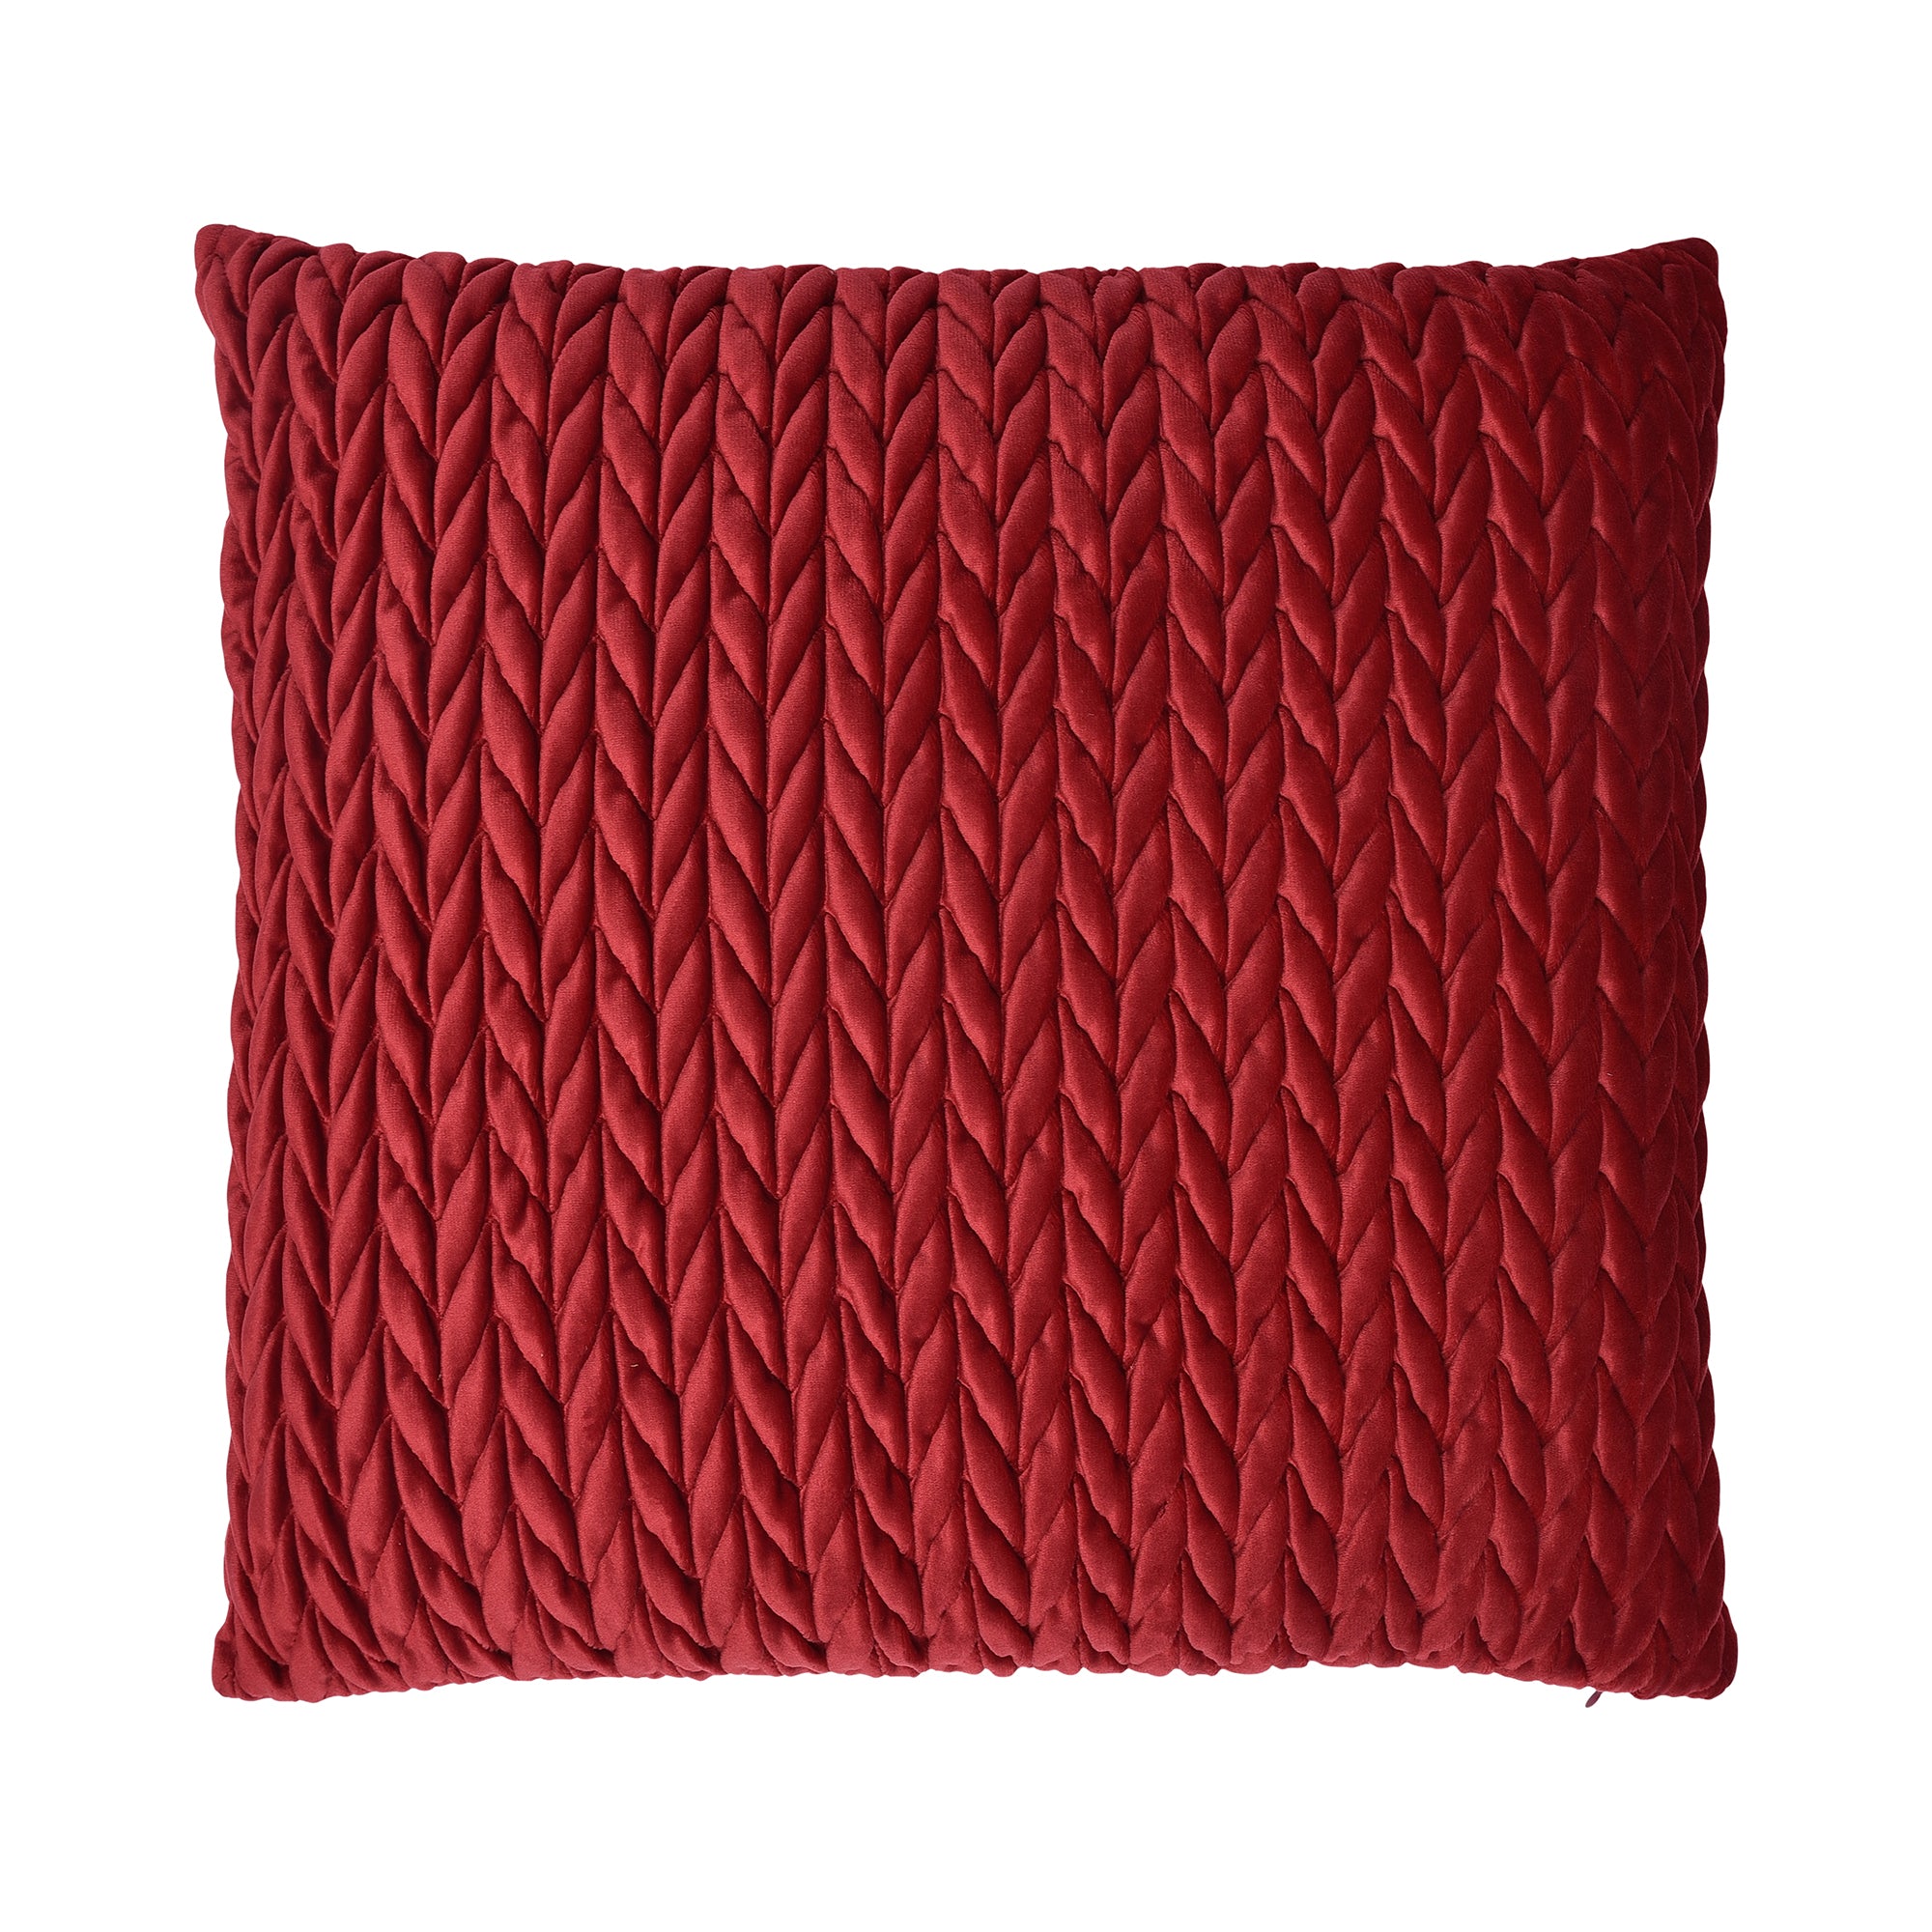 Cushion Cover Amory by Laurence Llewelyn-Bowen in Claret